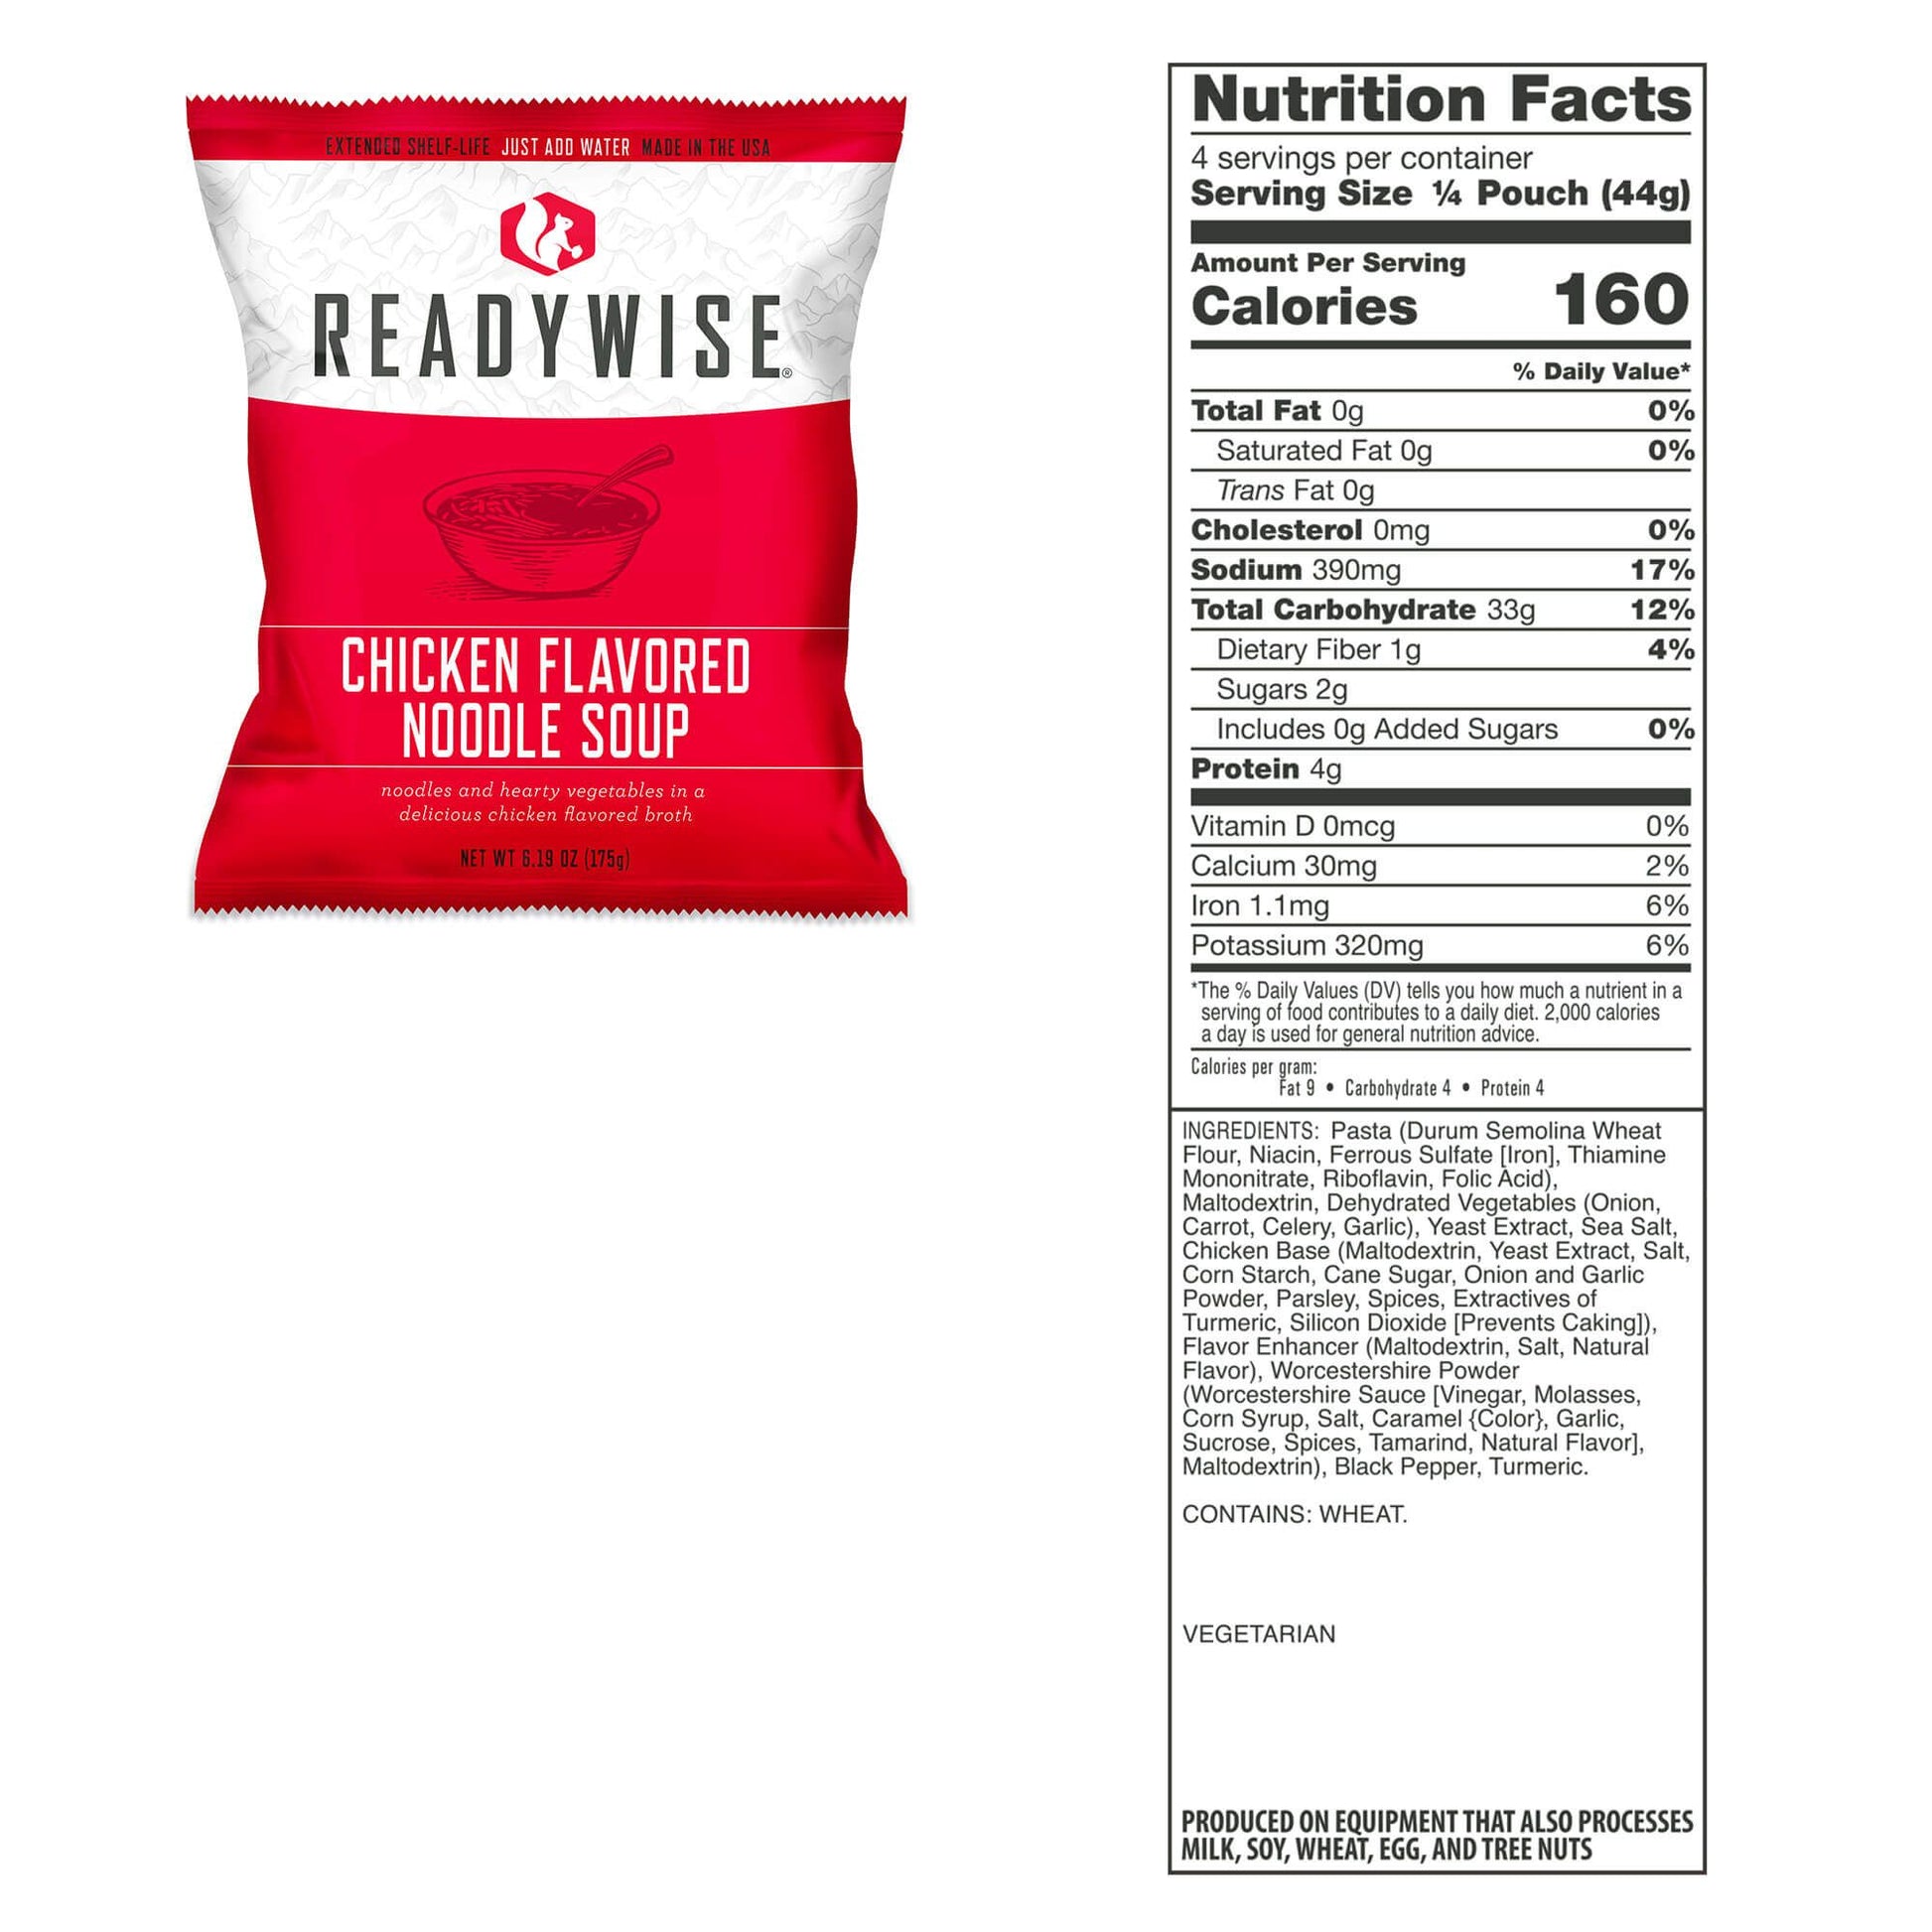 Chicken Flavored Noodle Soup packet with nutritional information